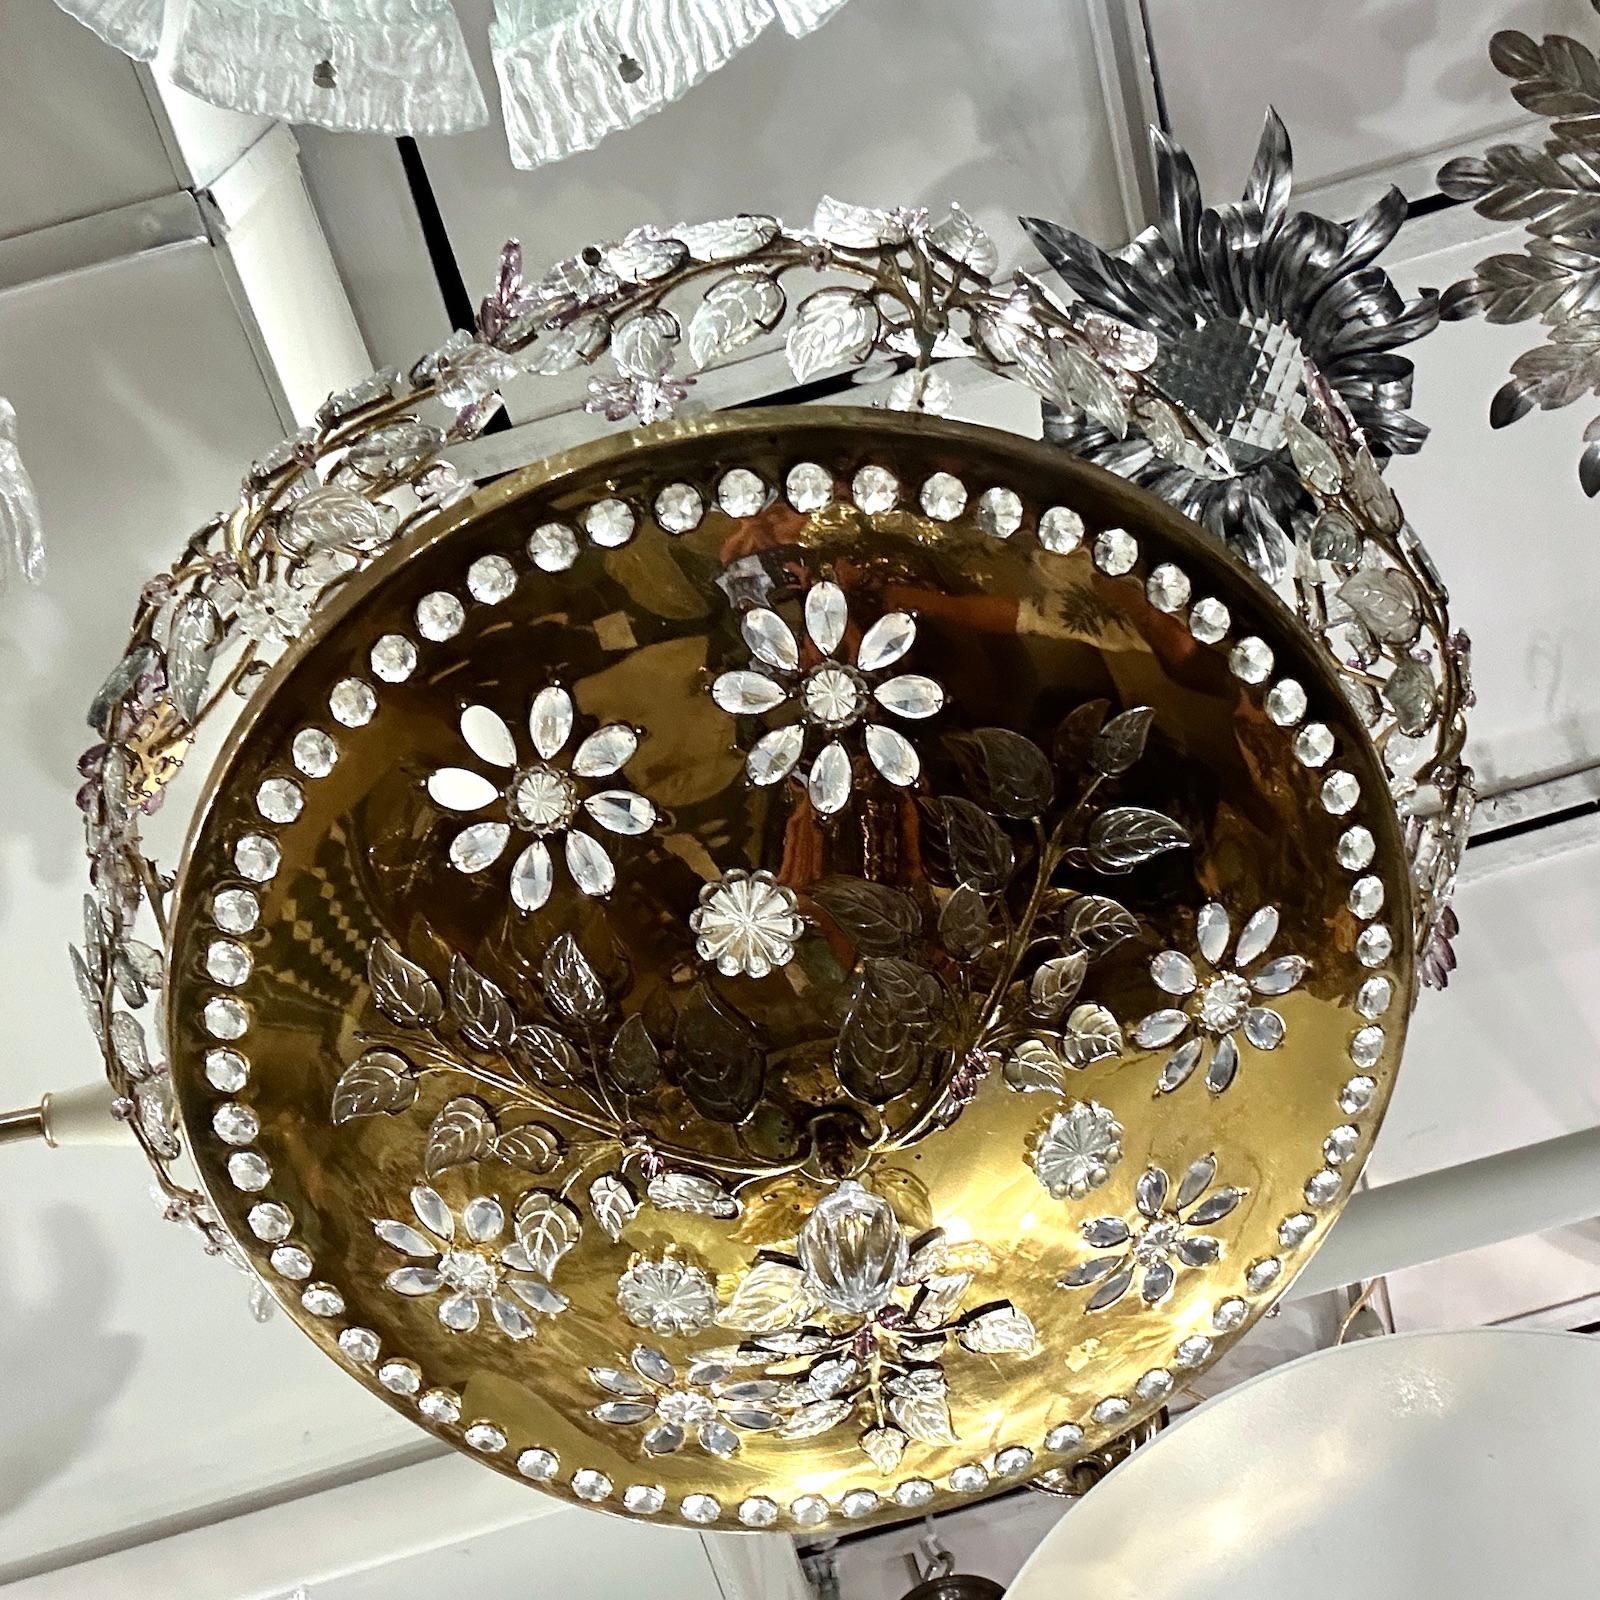 A circa 1950’s French gilt metal chandelier with crystal insets, molded glass leaves, cut amethyst crystal flowers and interior lights.

Measurements:
Diameter: 24″
Drop: 28″